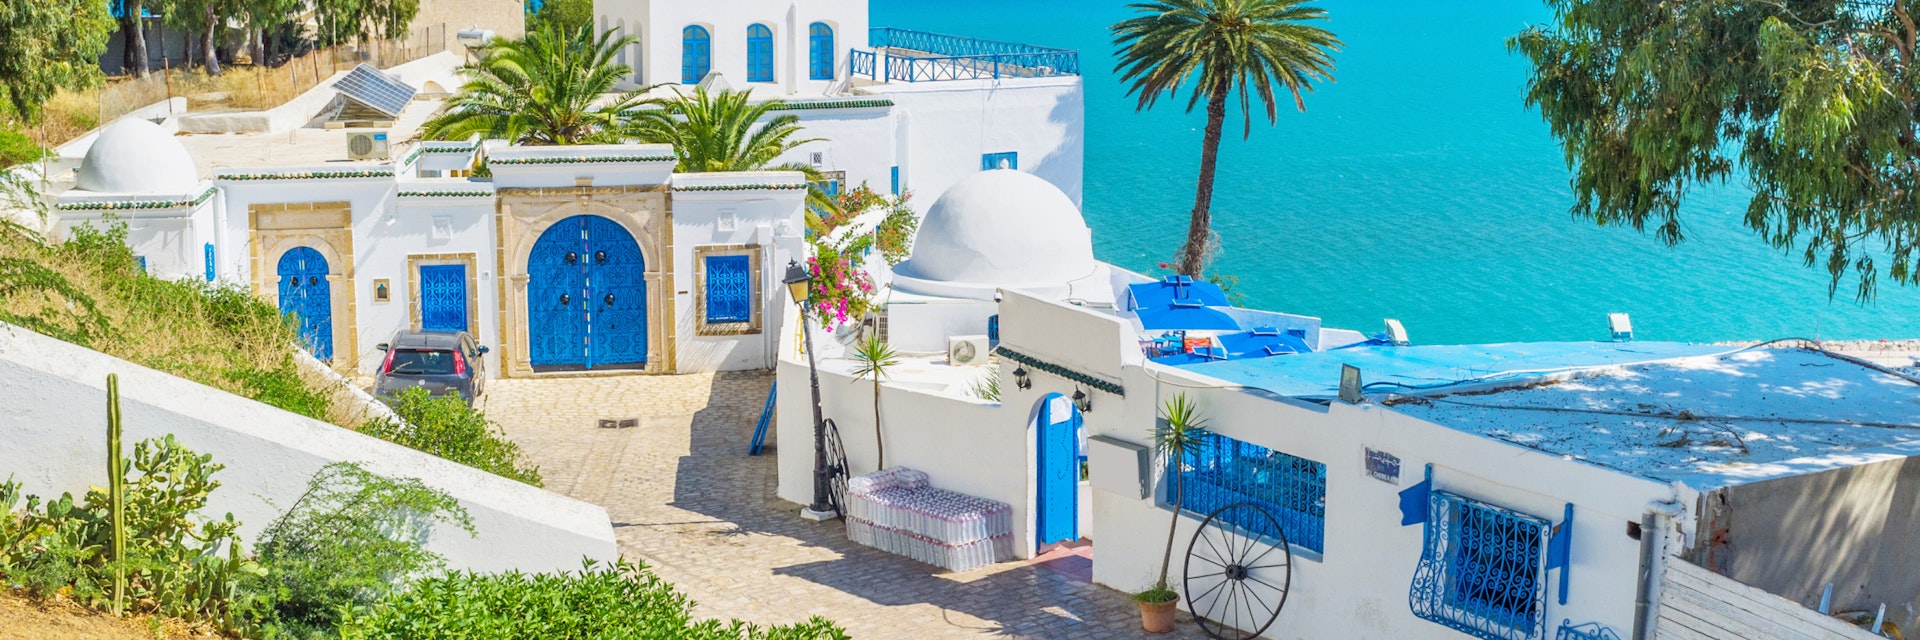 One of the most beautiful views in the mountain village of Sidi Bou Said, Tunisia.